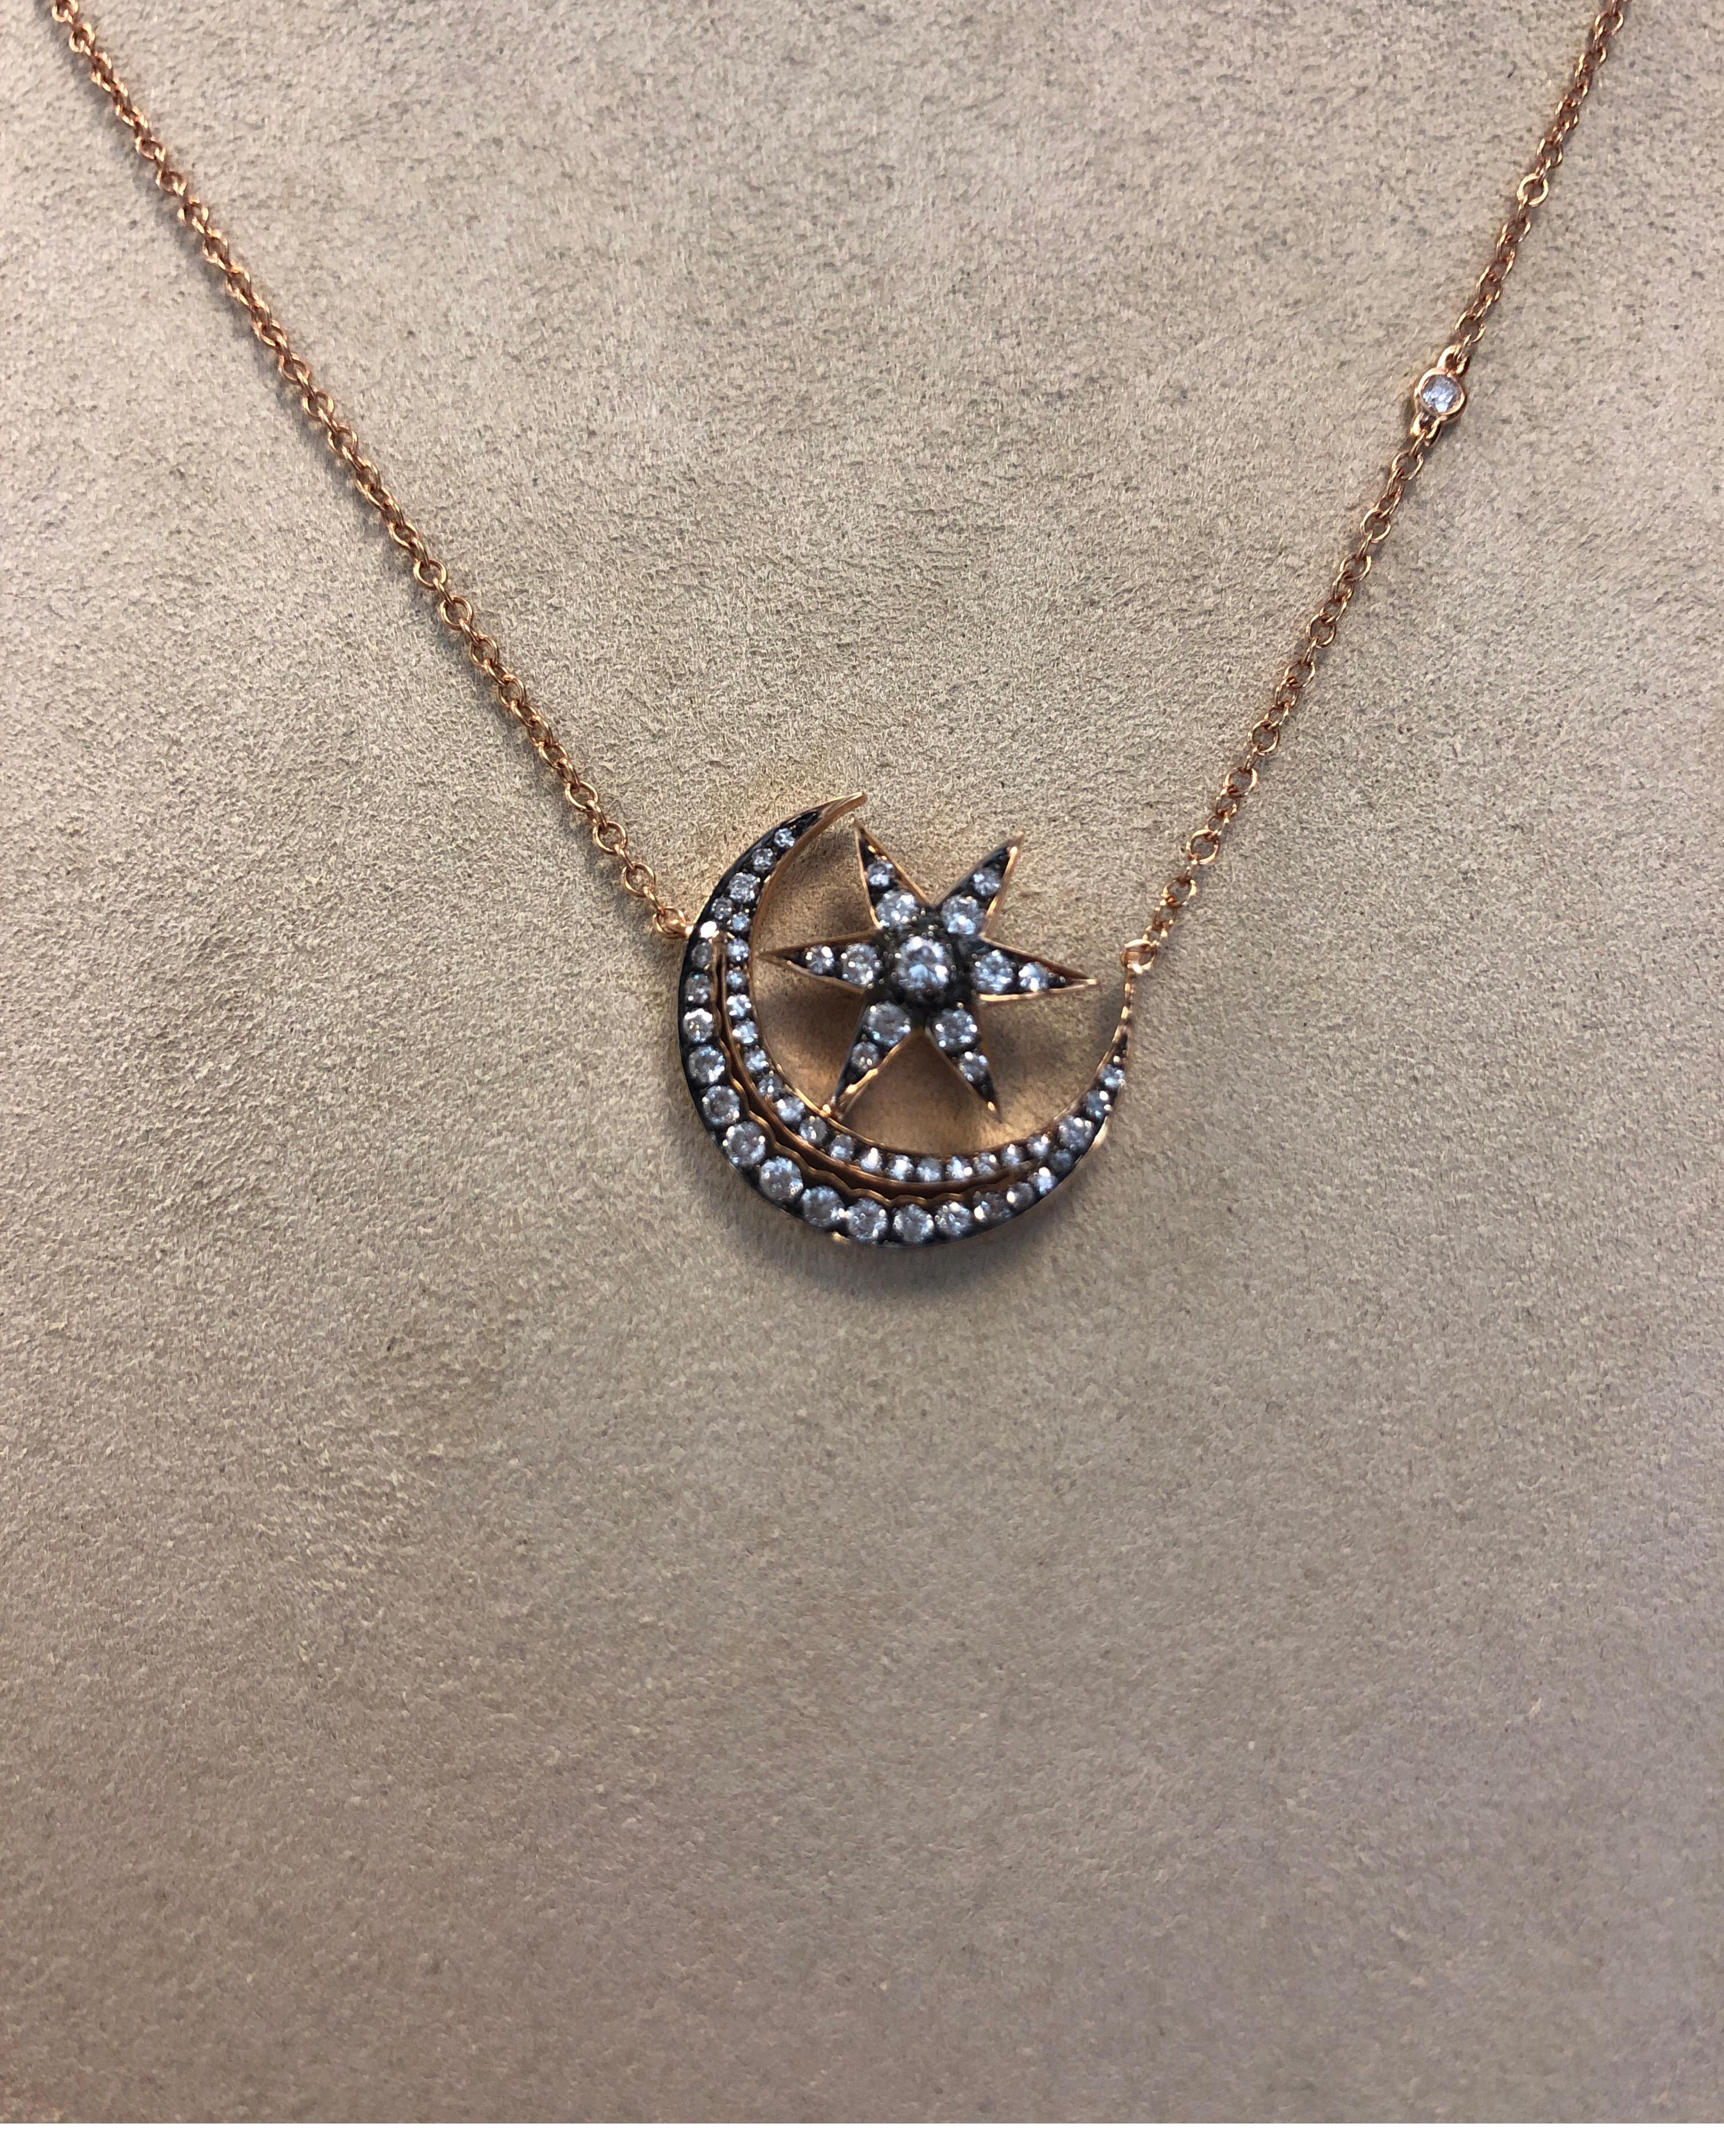 18K rose gold necklace, by SHAY, with half moon and star, channel and prong set with diamonds weighing .58cts, length 17 inches.
last retail $3150